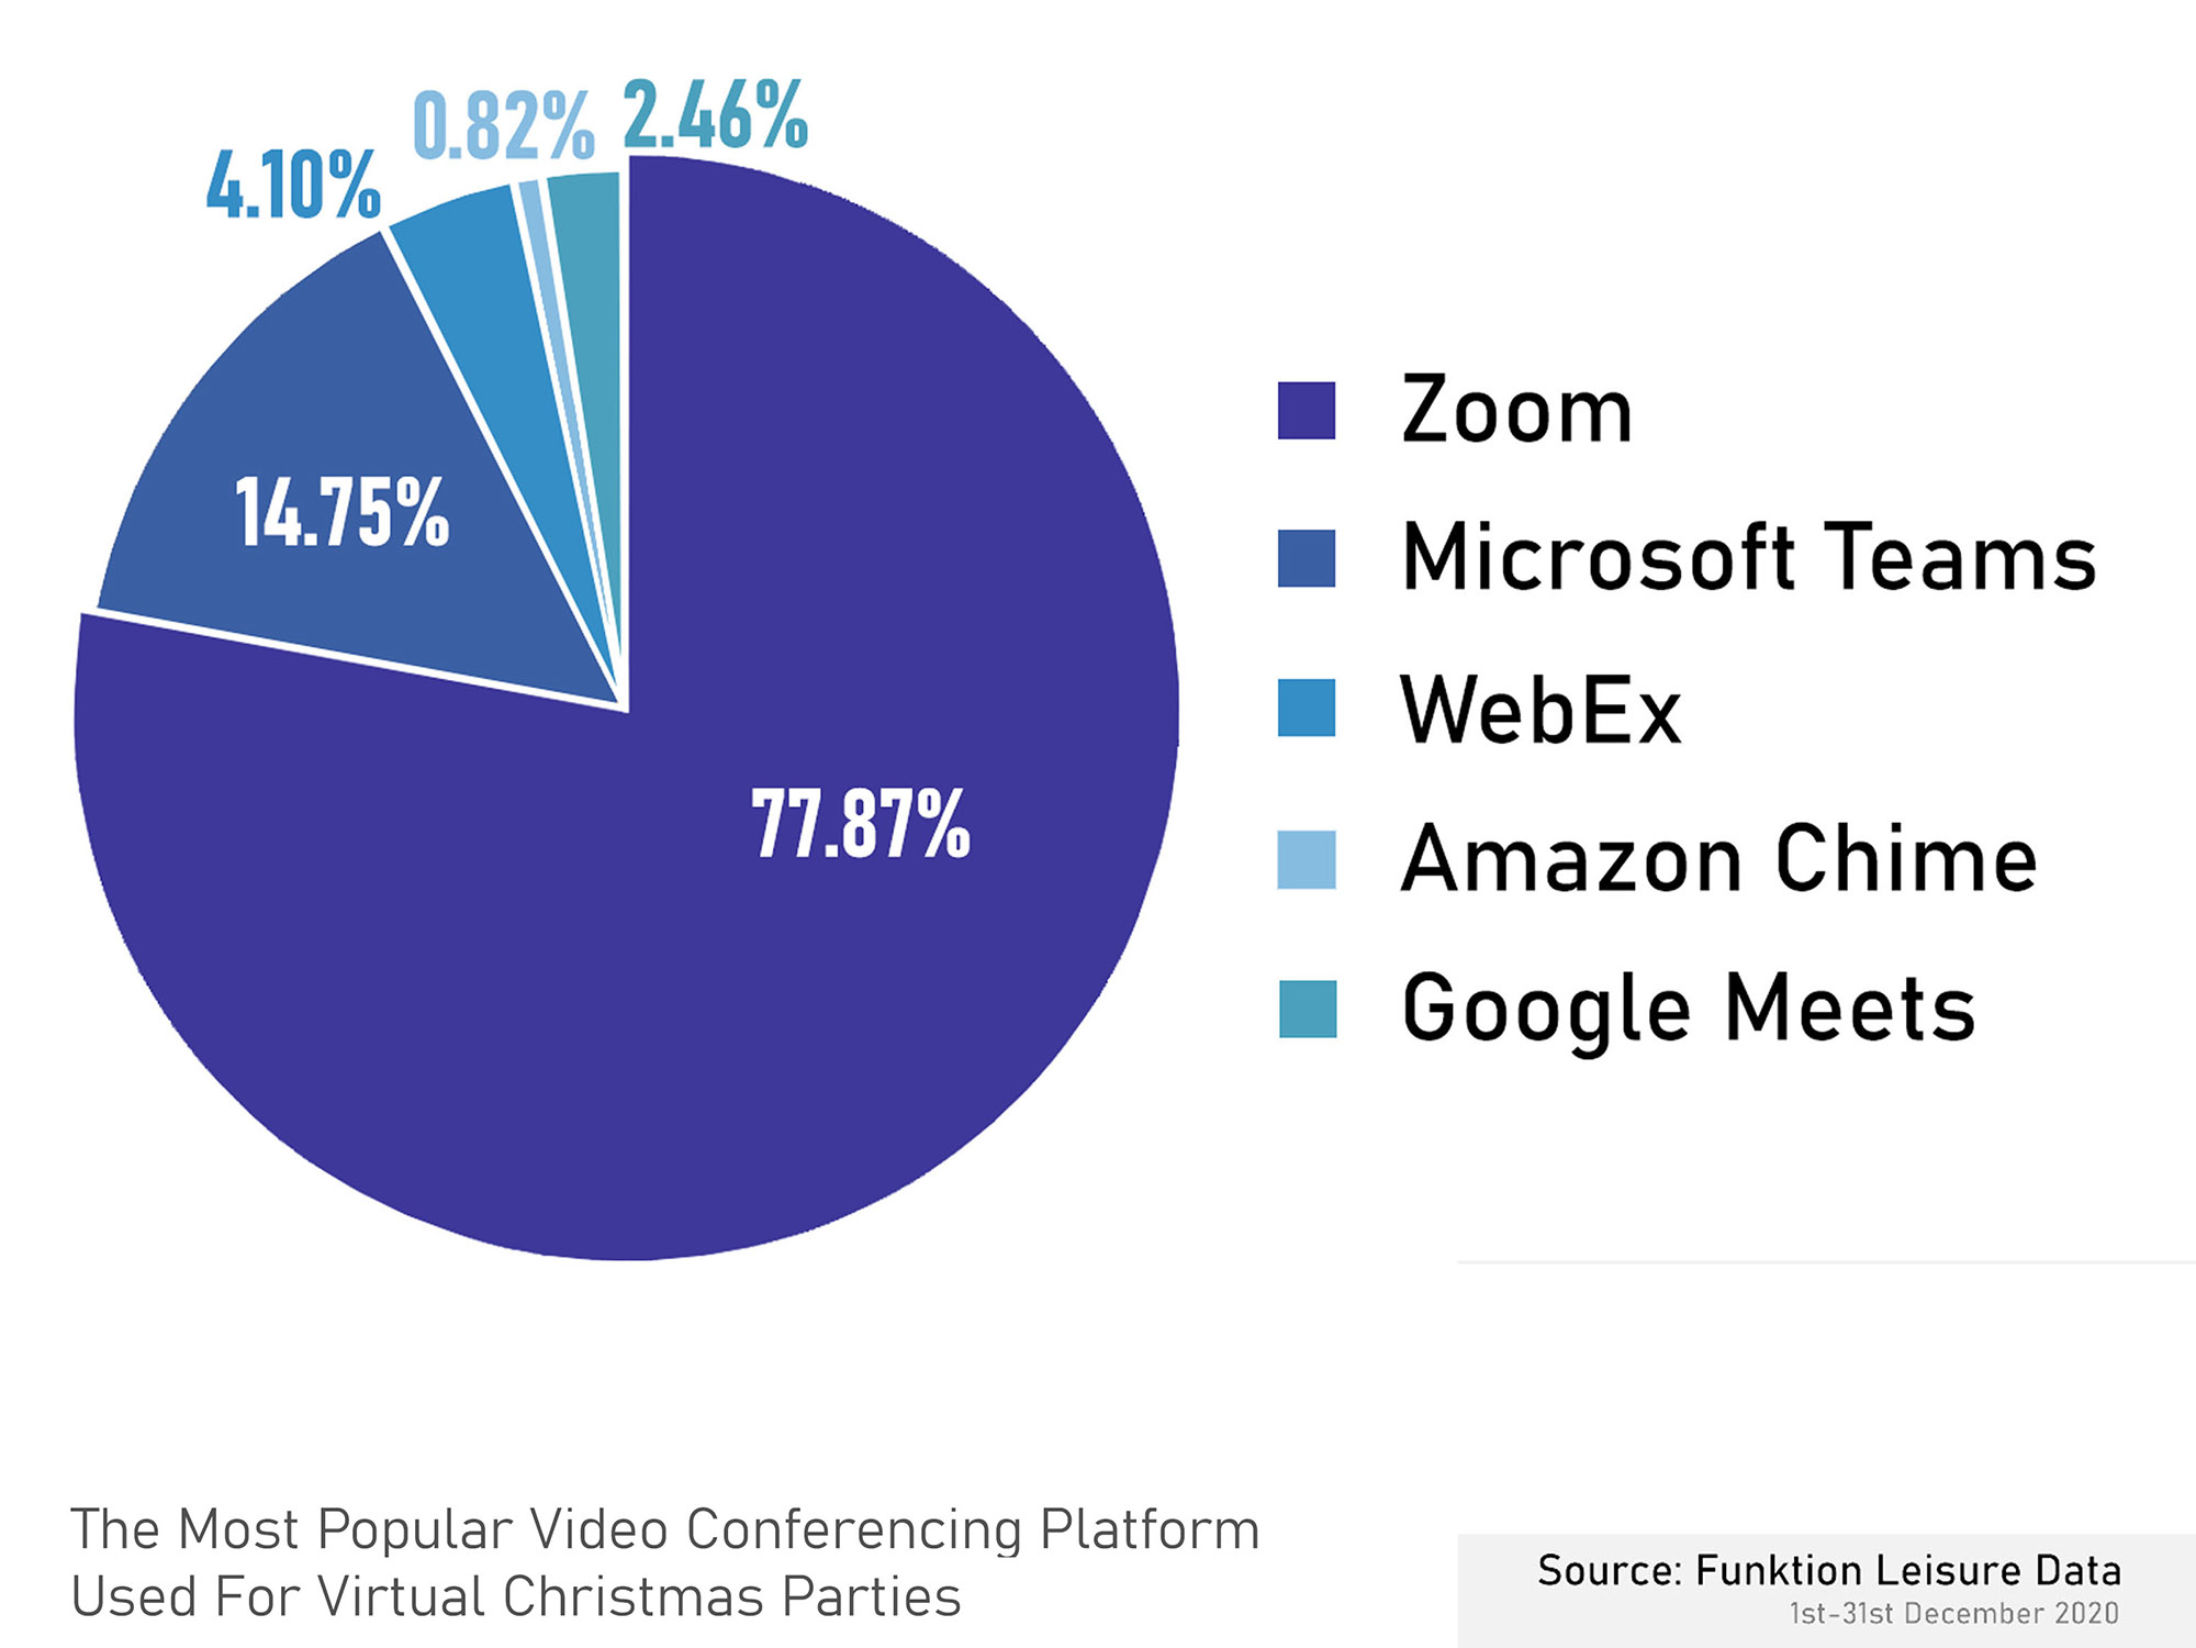 Most Popular Video Conferencing Platform for Virtual Christmas Parties